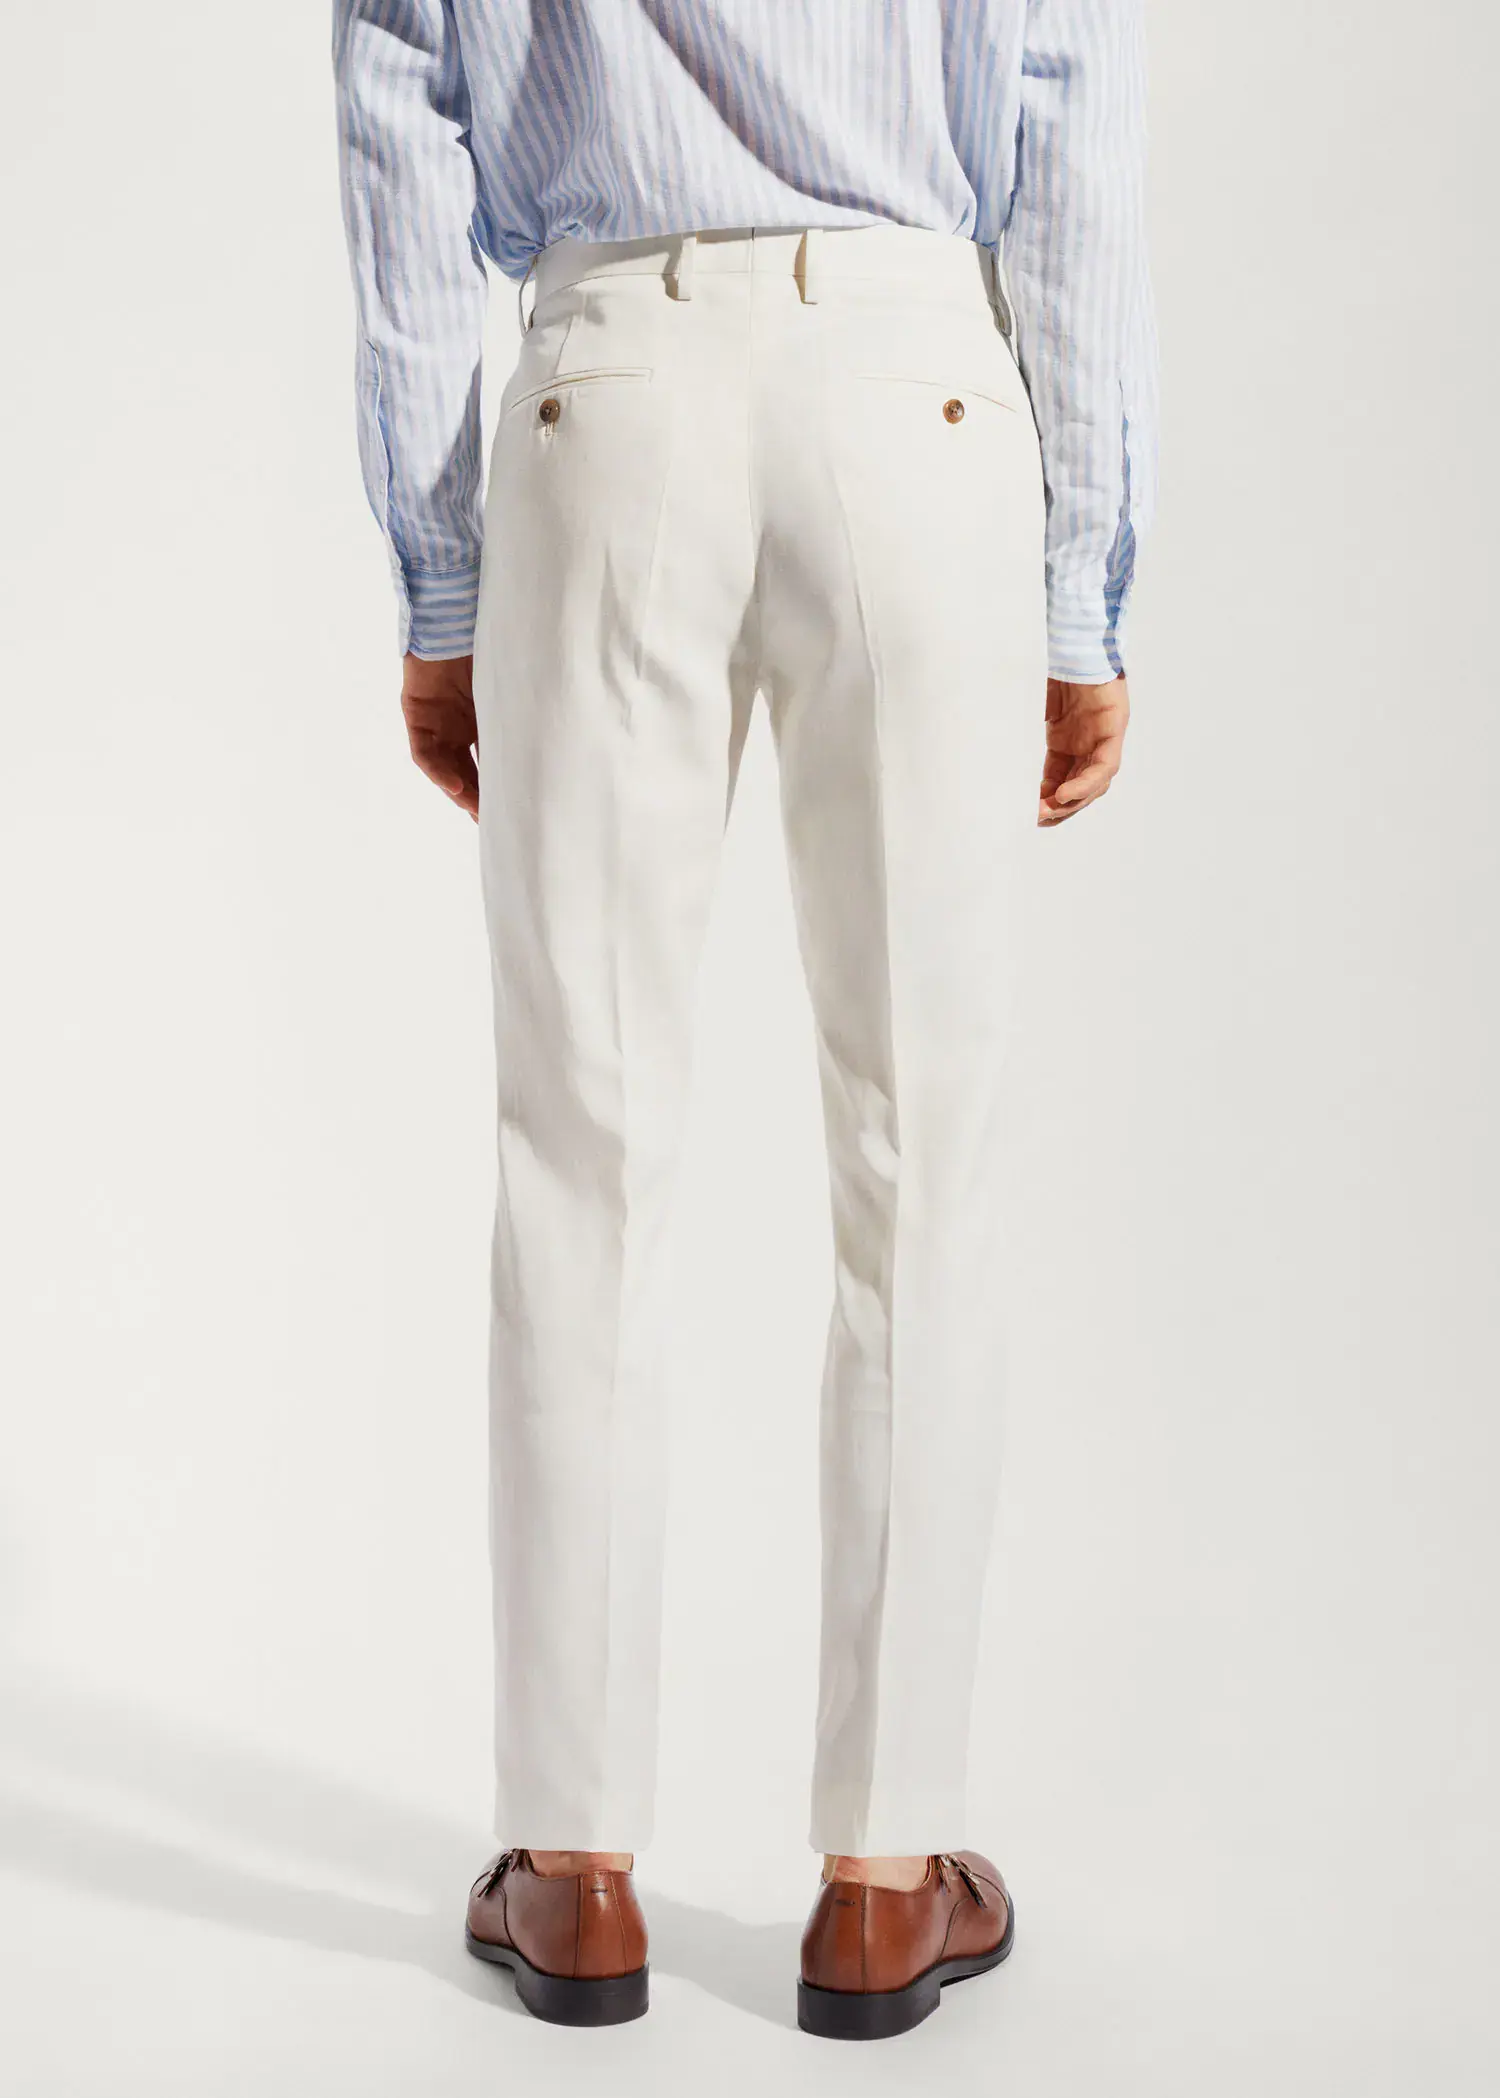 Mango 100% linen suit trousers. a man wearing white pants and a striped shirt. 